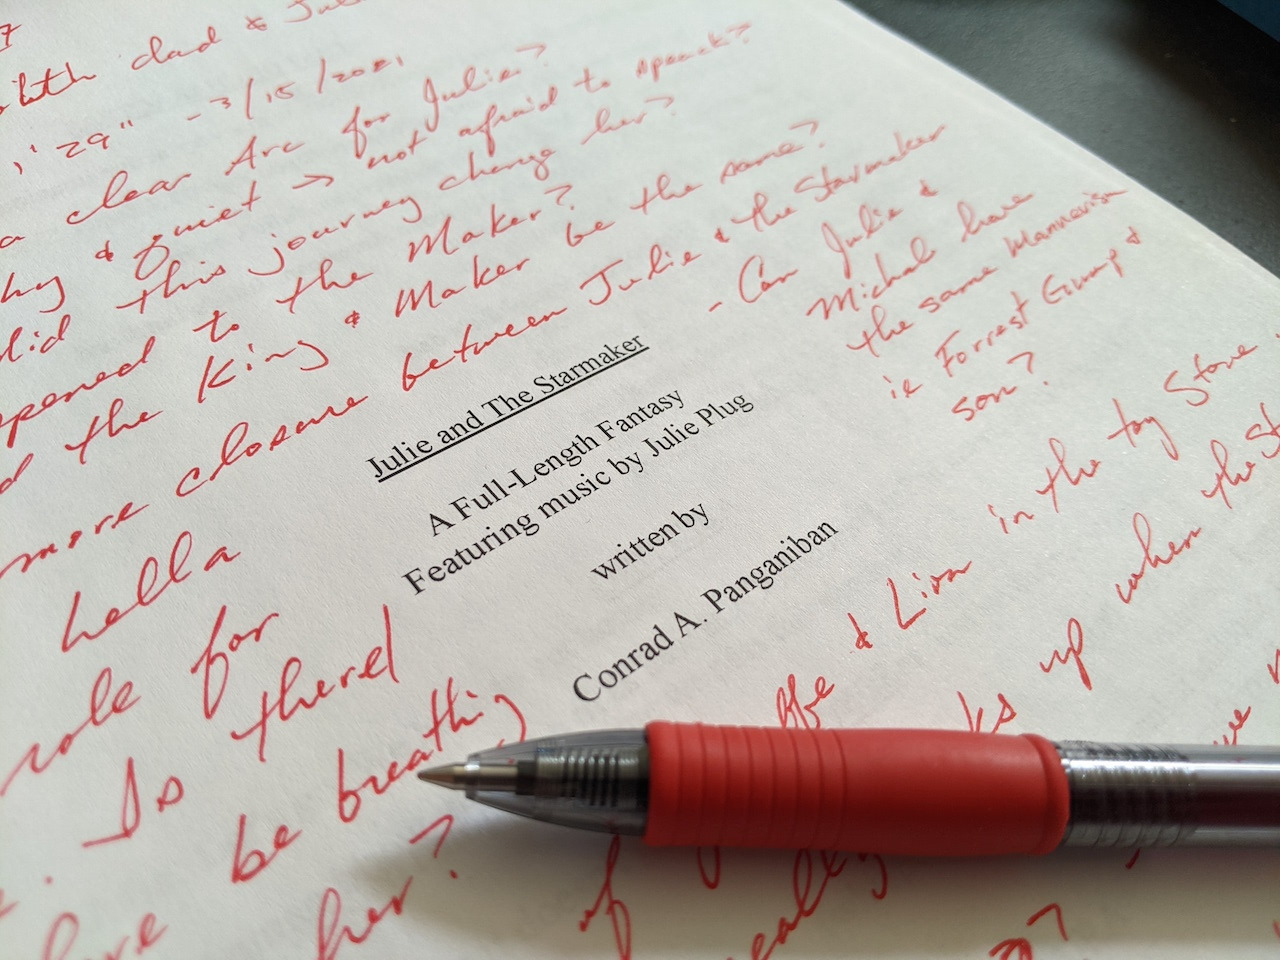 The coversheet for JULIE AND THE STARMAKER with various notes and questions written in red ink with a red pen resting on it.